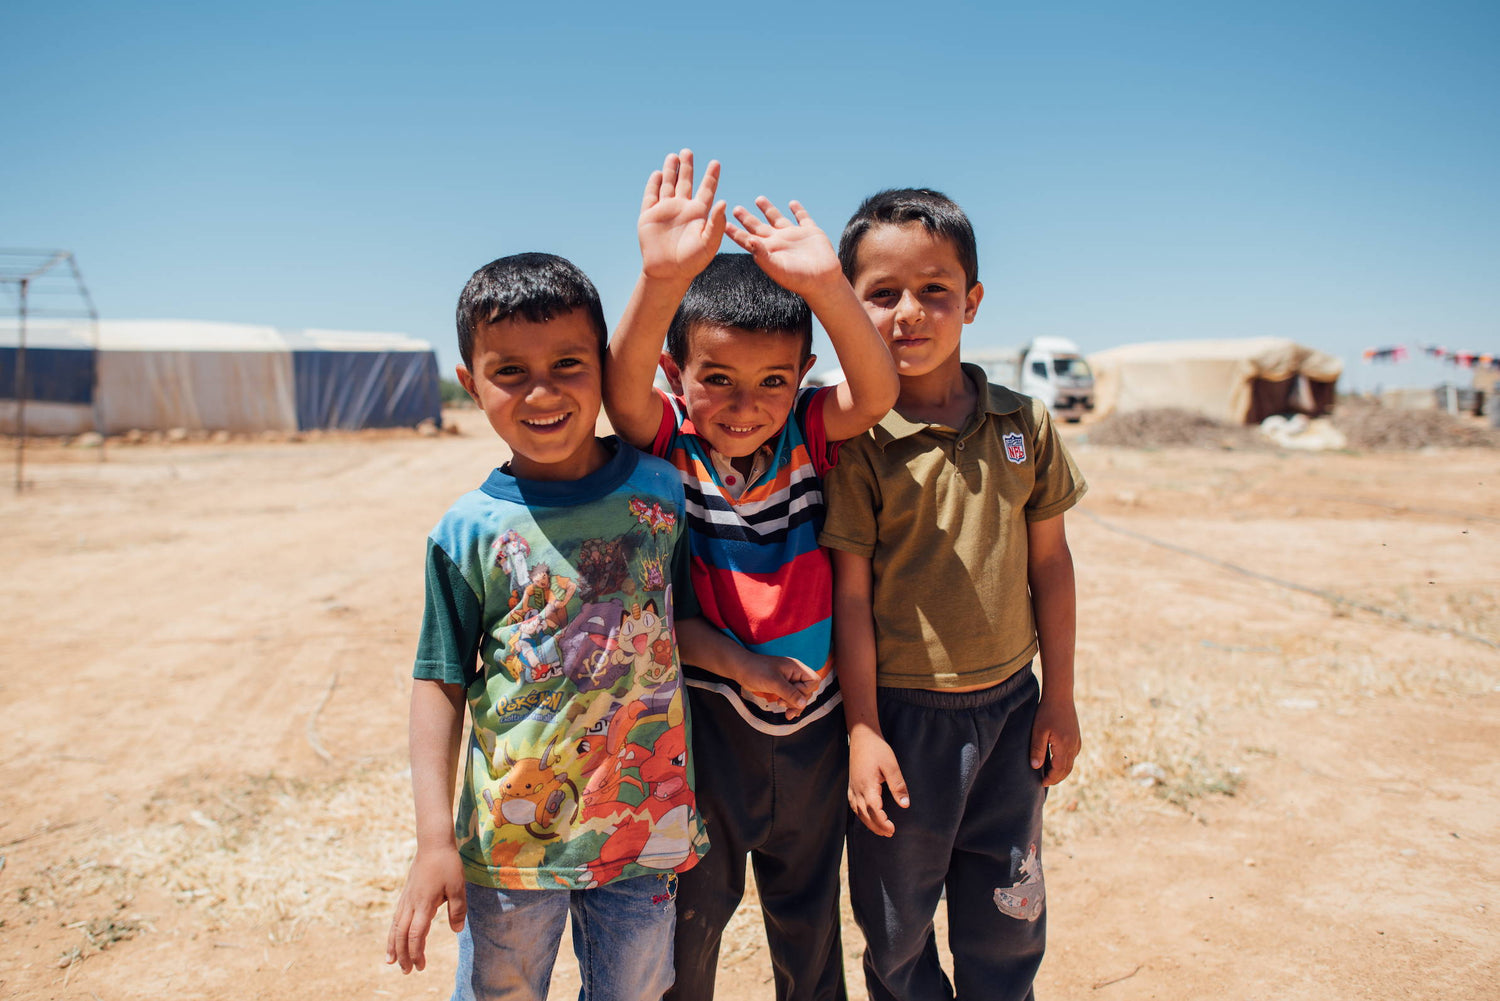 Help us Light the Path Ahead for Refugee Children